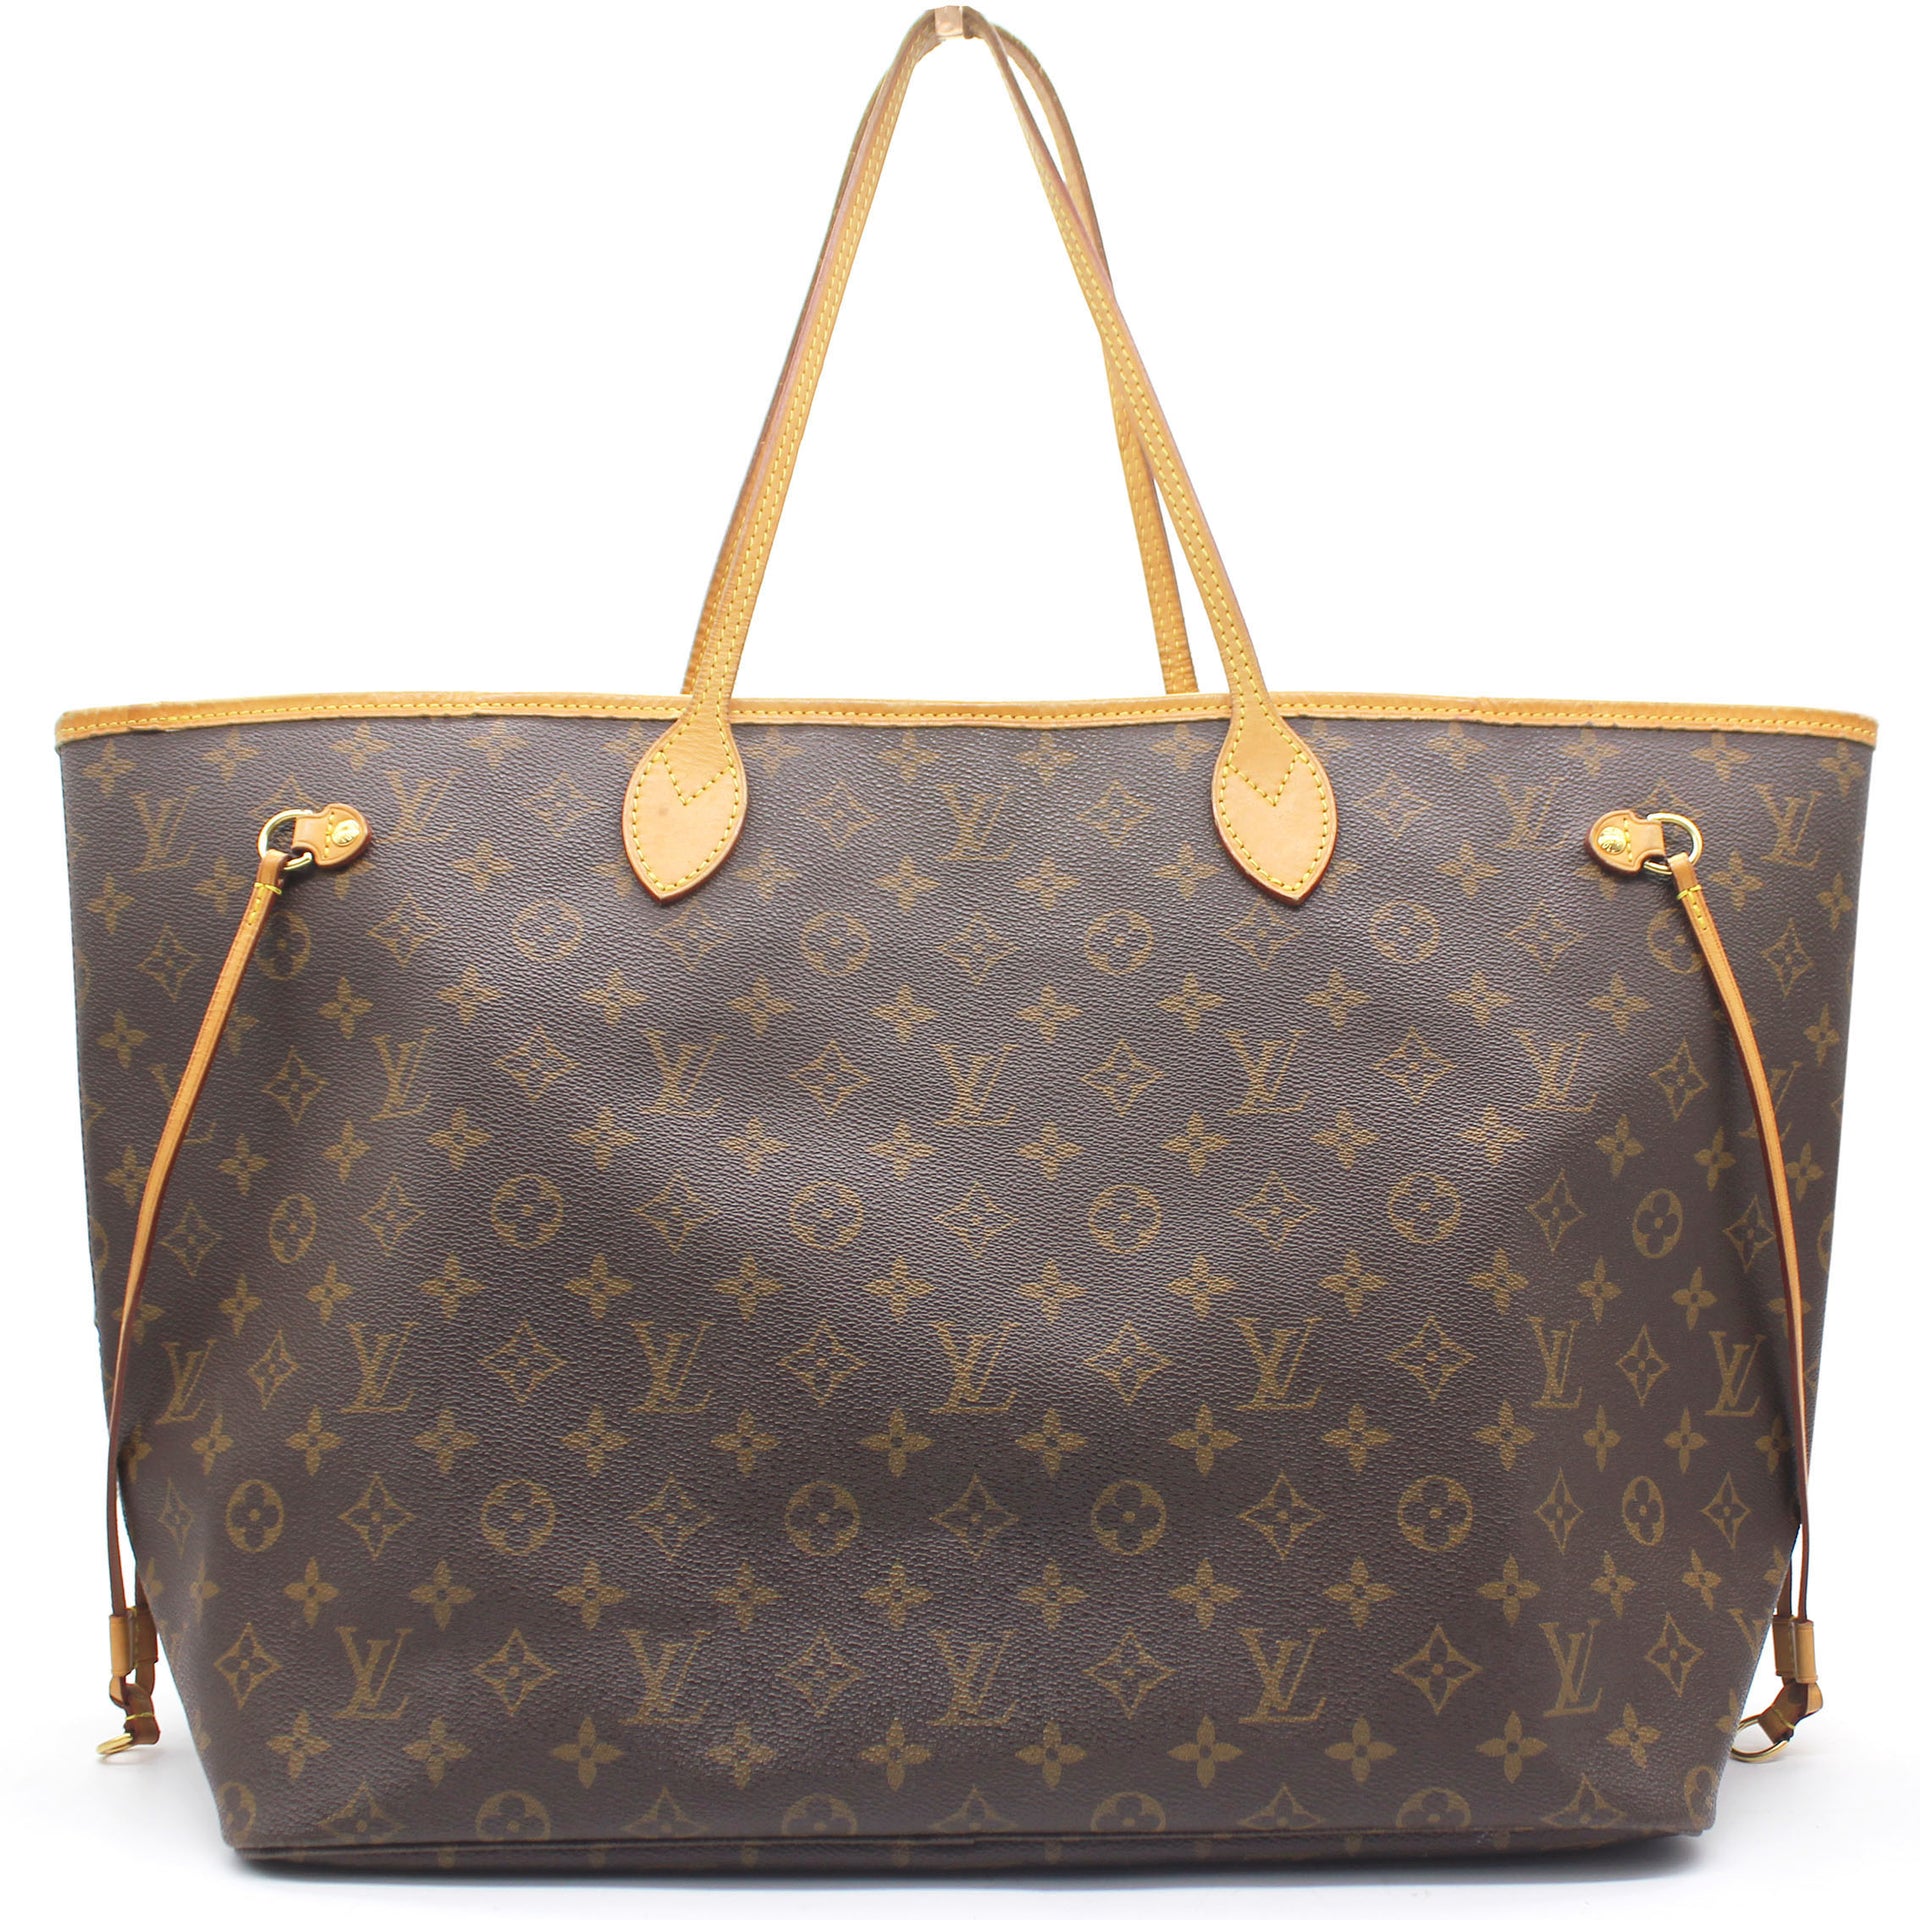 A Bag That's Never Full. The Louis Vuitton Neverfull - The Lux Portal